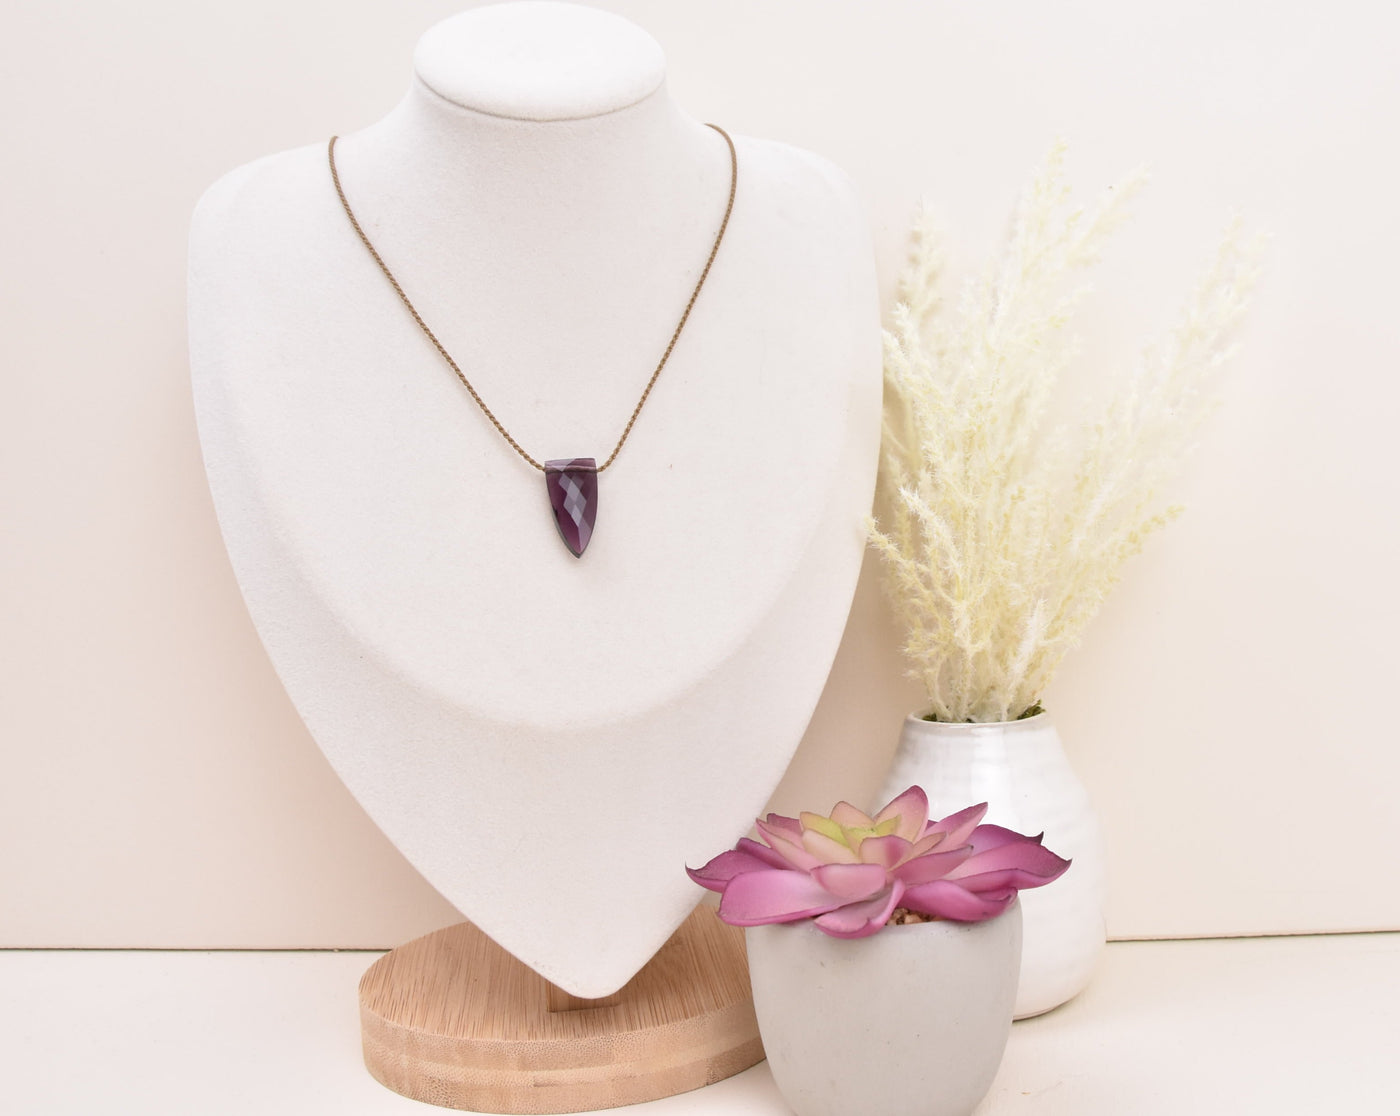 Amethyst Pyramid Necklace - Limited!